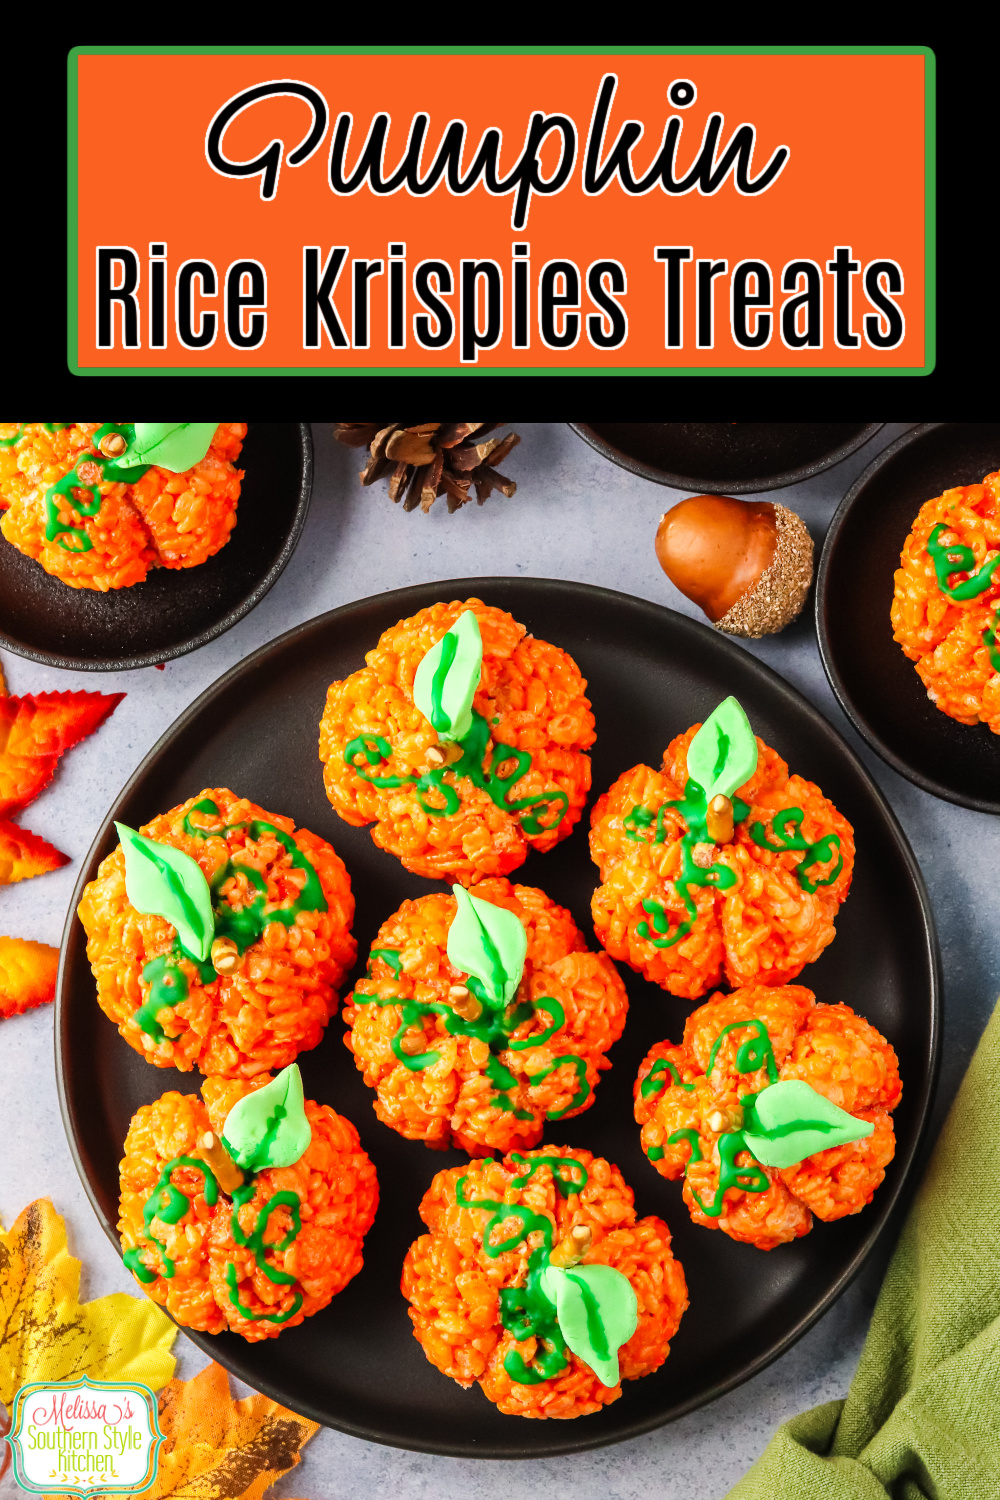 These fun Pumpkin Rice Krispies Treats are a delicious option for any of your fall gatherings. #ricekrispiestreats #falldesserts #pumpkinrecipes #easydesserts #pumpkin #easyricekrispiestreats #pumpkinricekrispiestreats via @melissasssk